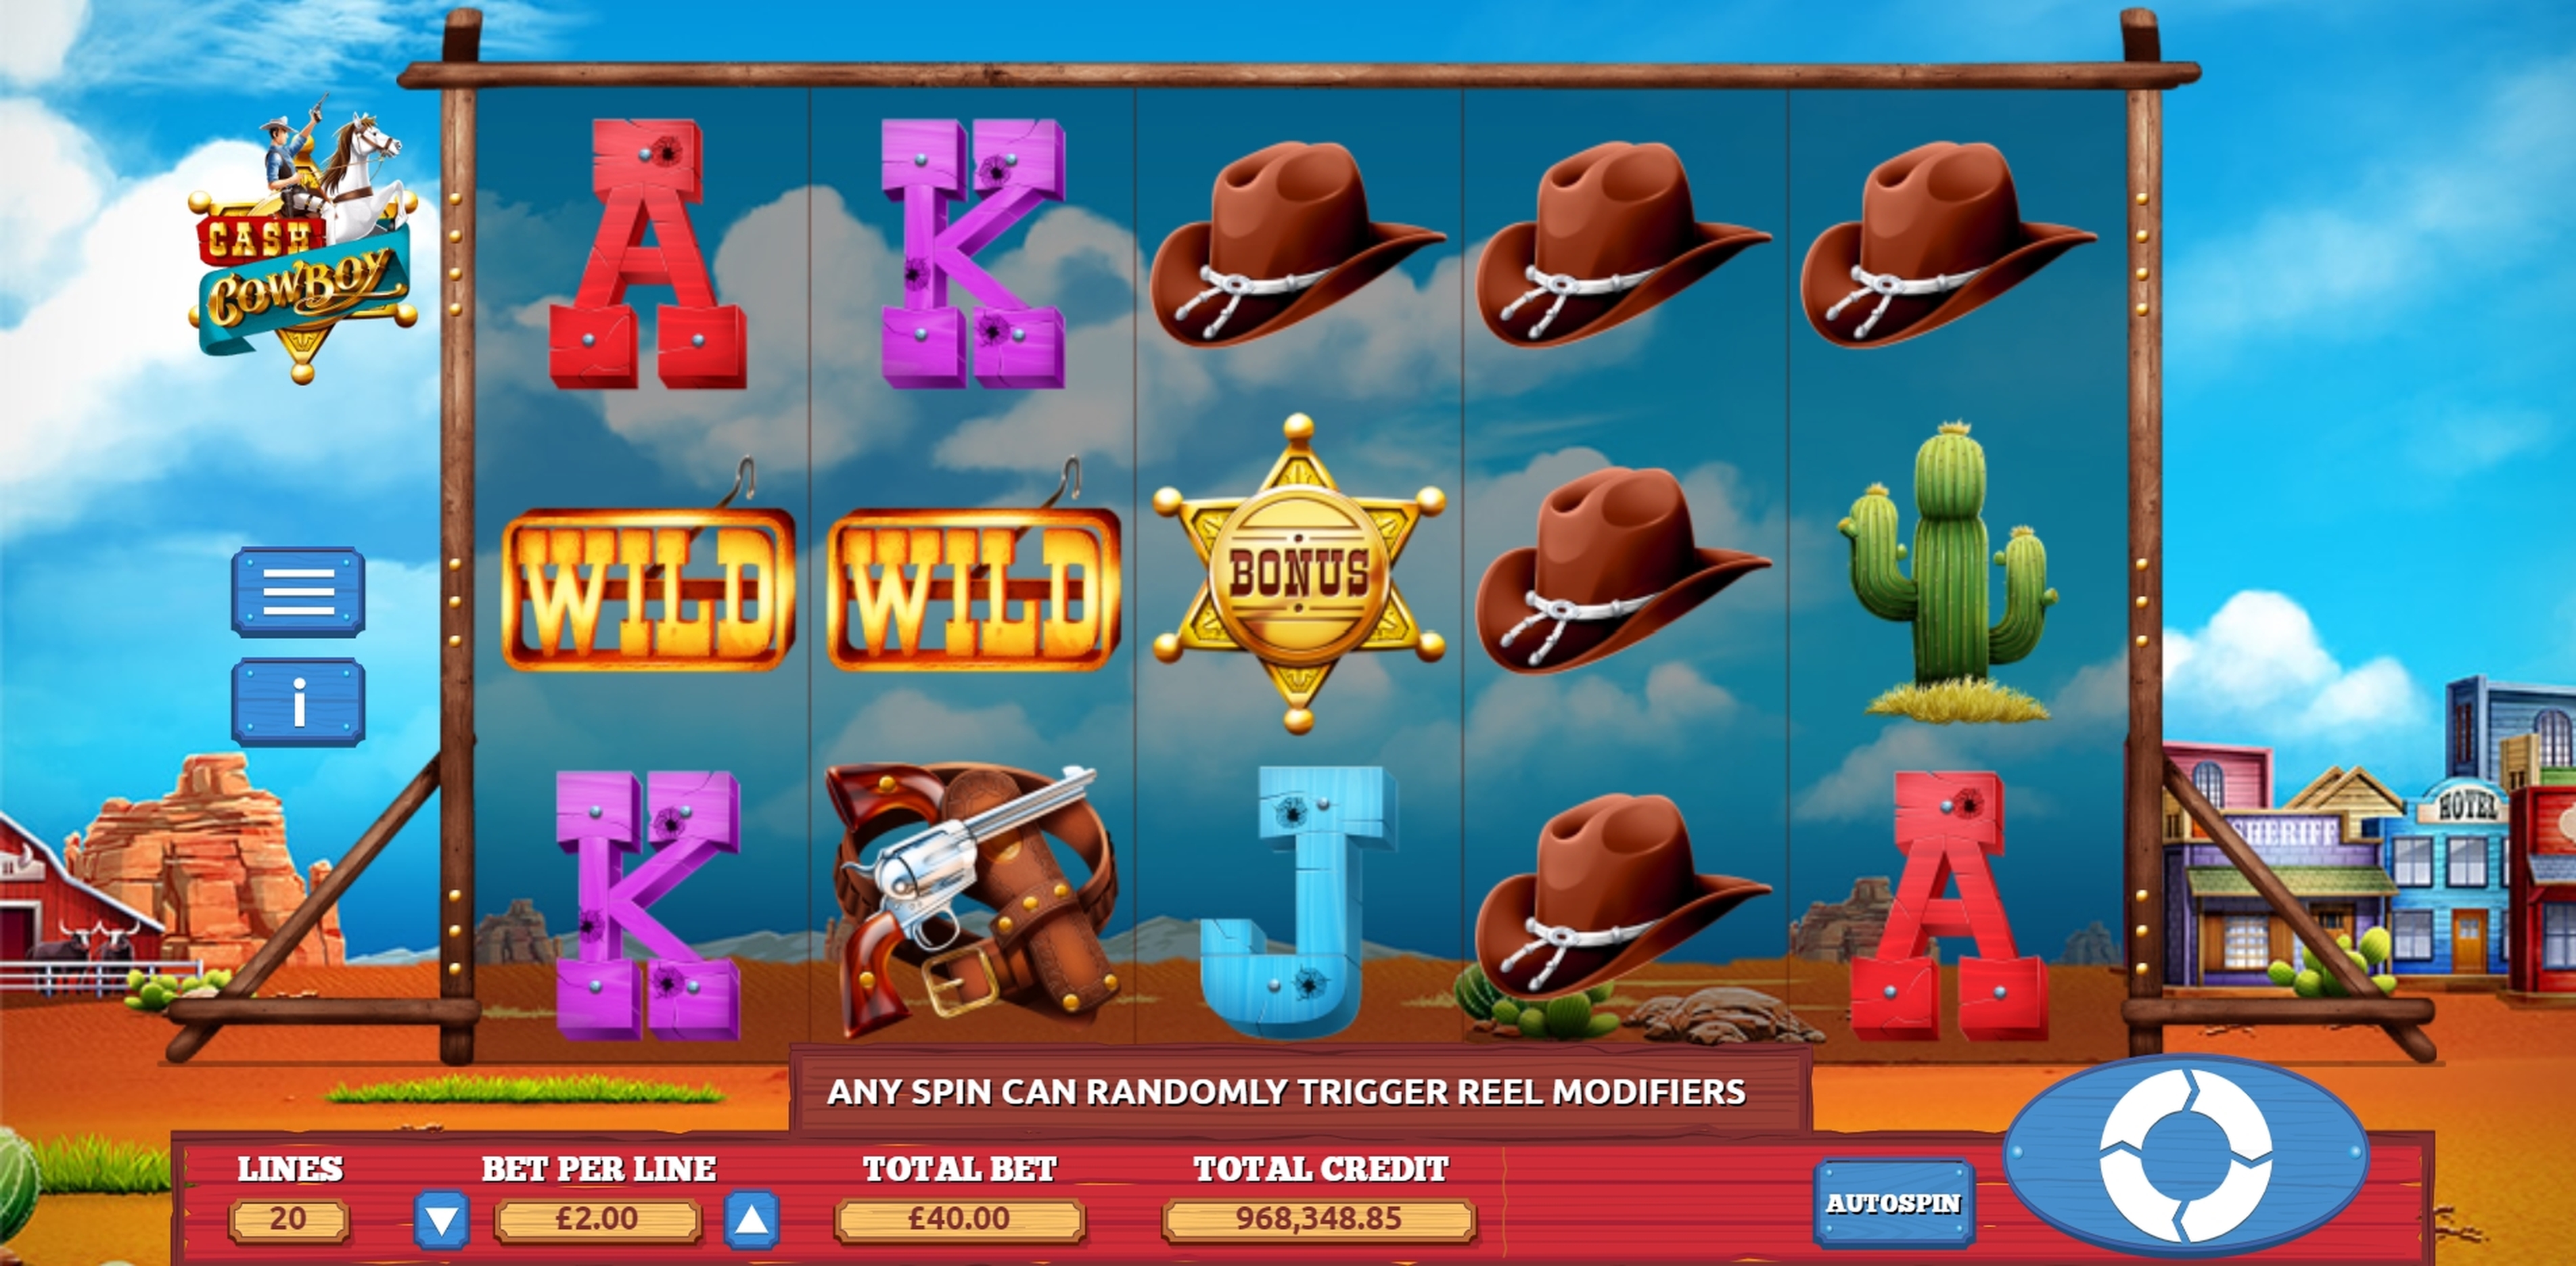 Reels in Cash Cowboys Slot Game by The Games Company